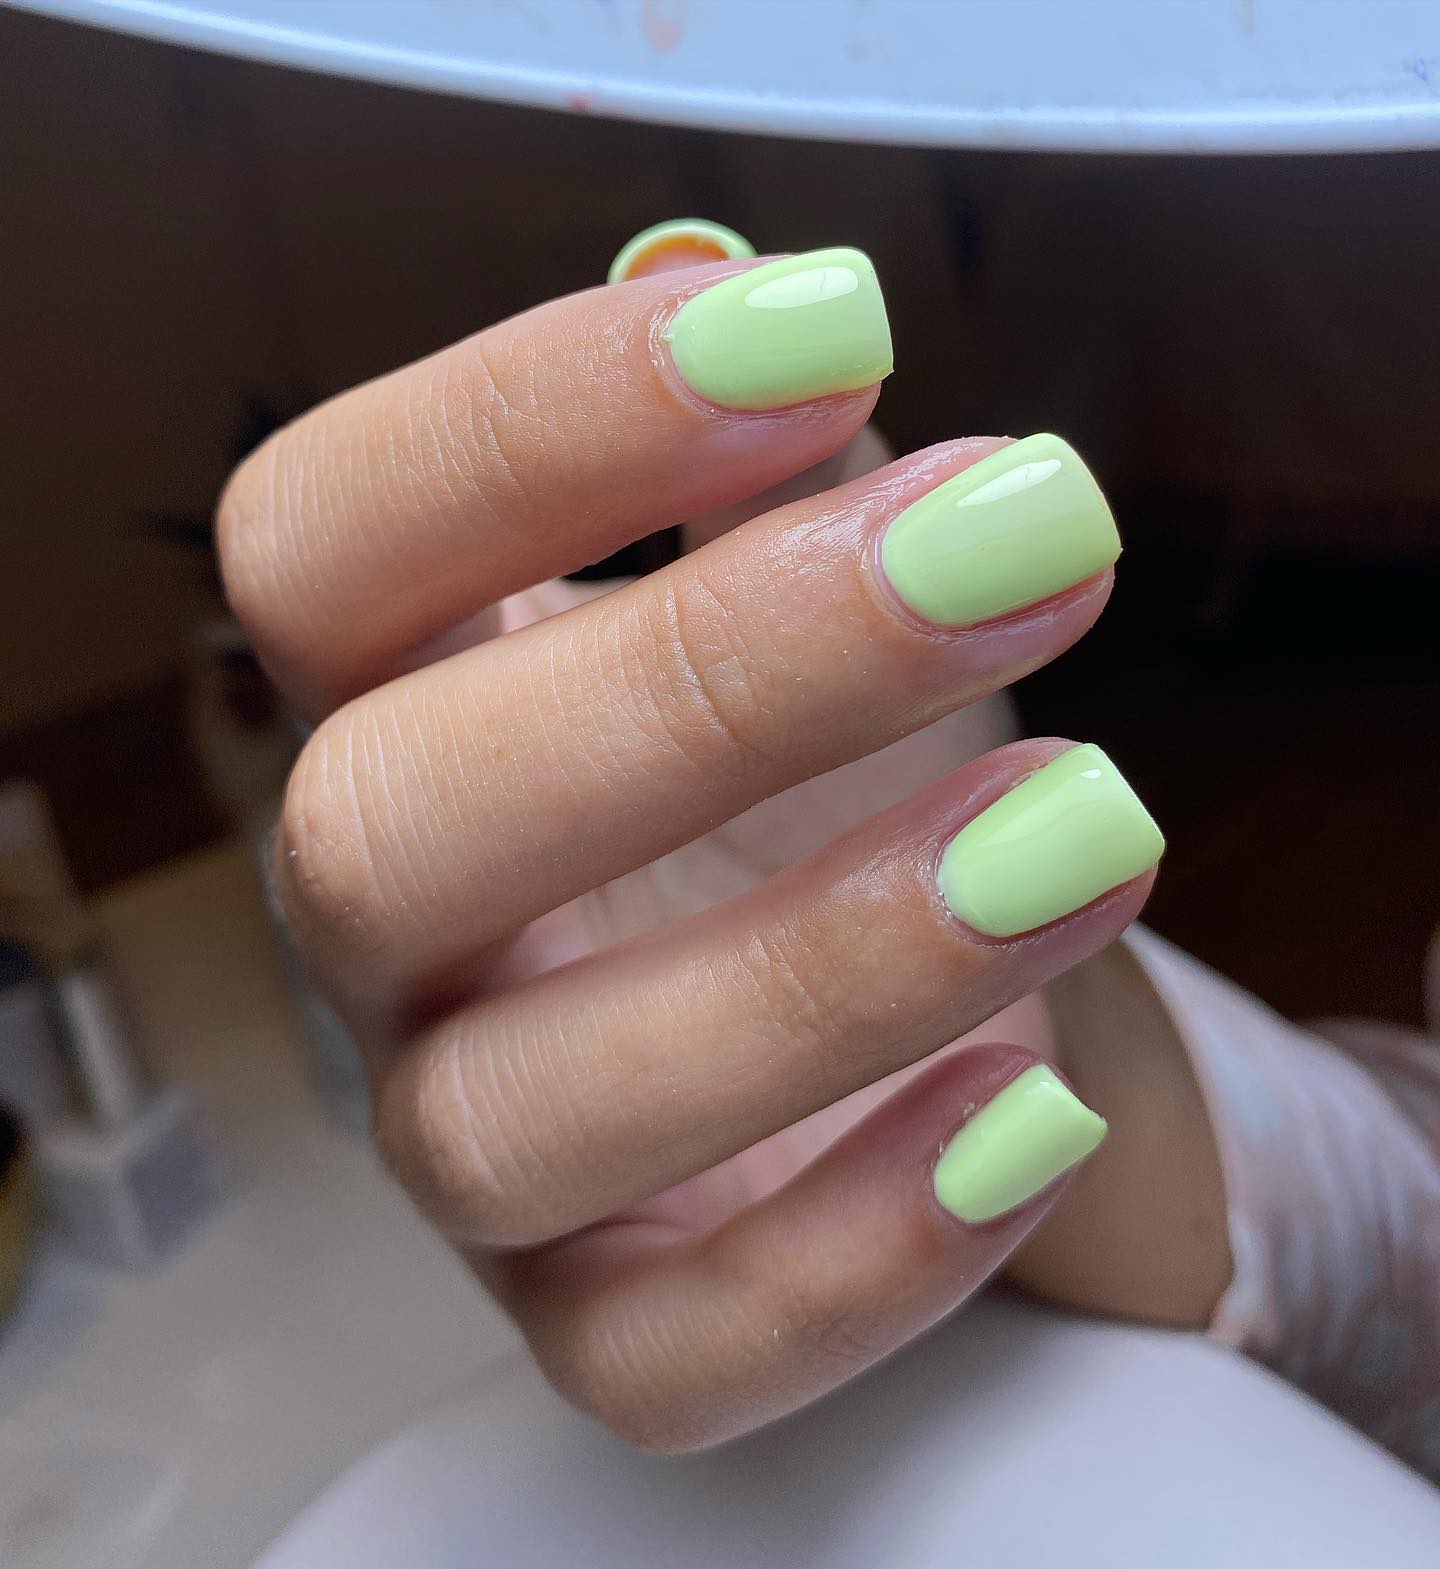 Just look at how cute this greenish color is. It can be one of the best summer nail colors for you. Let's try it out.